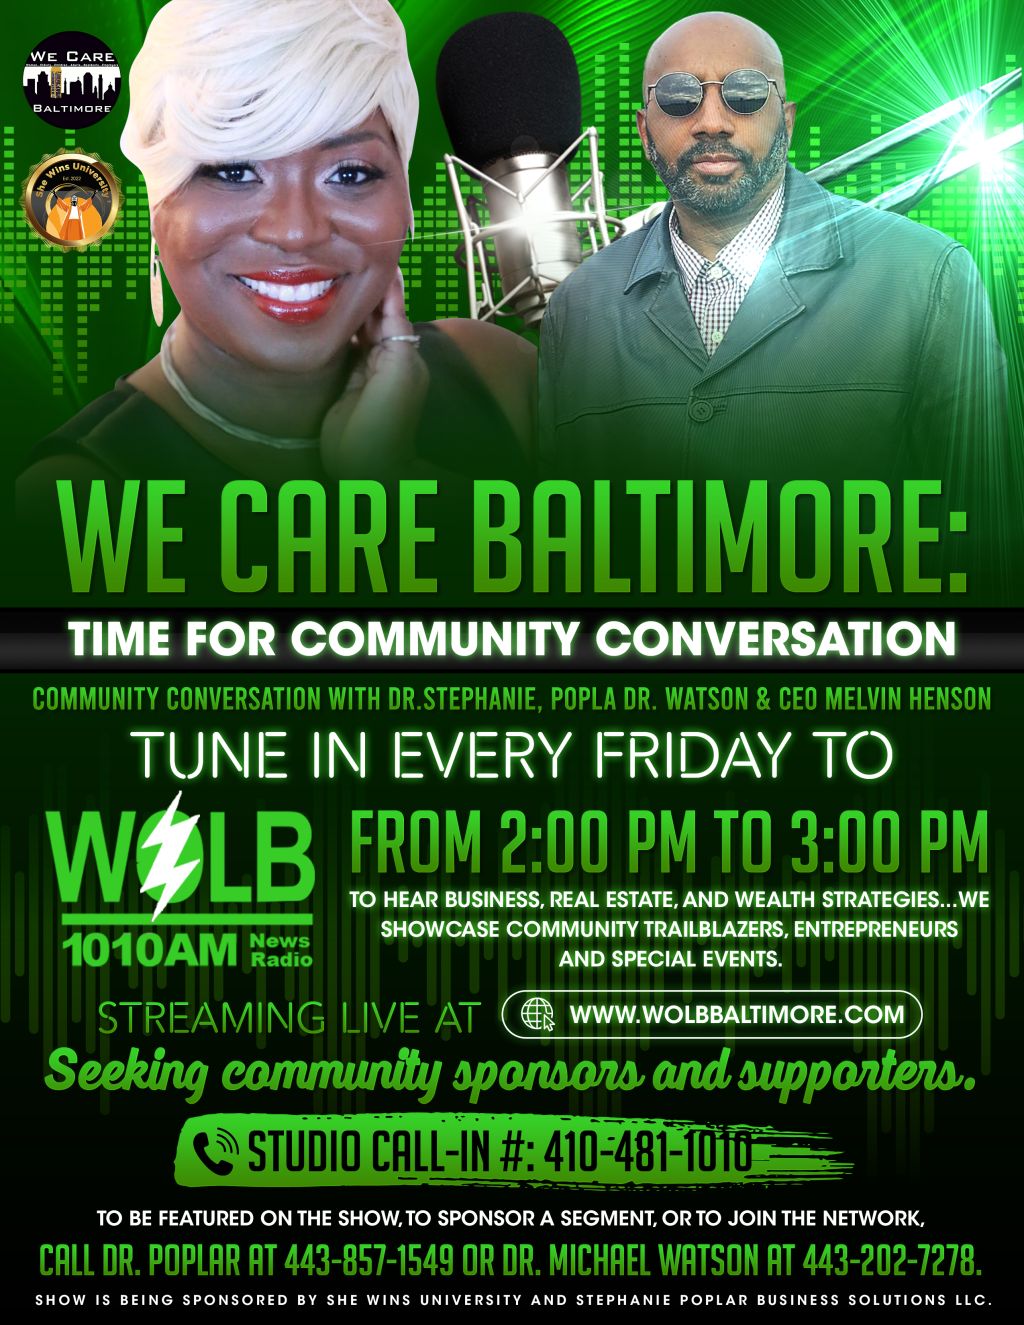 We Care Baltimore On WOLB 1010